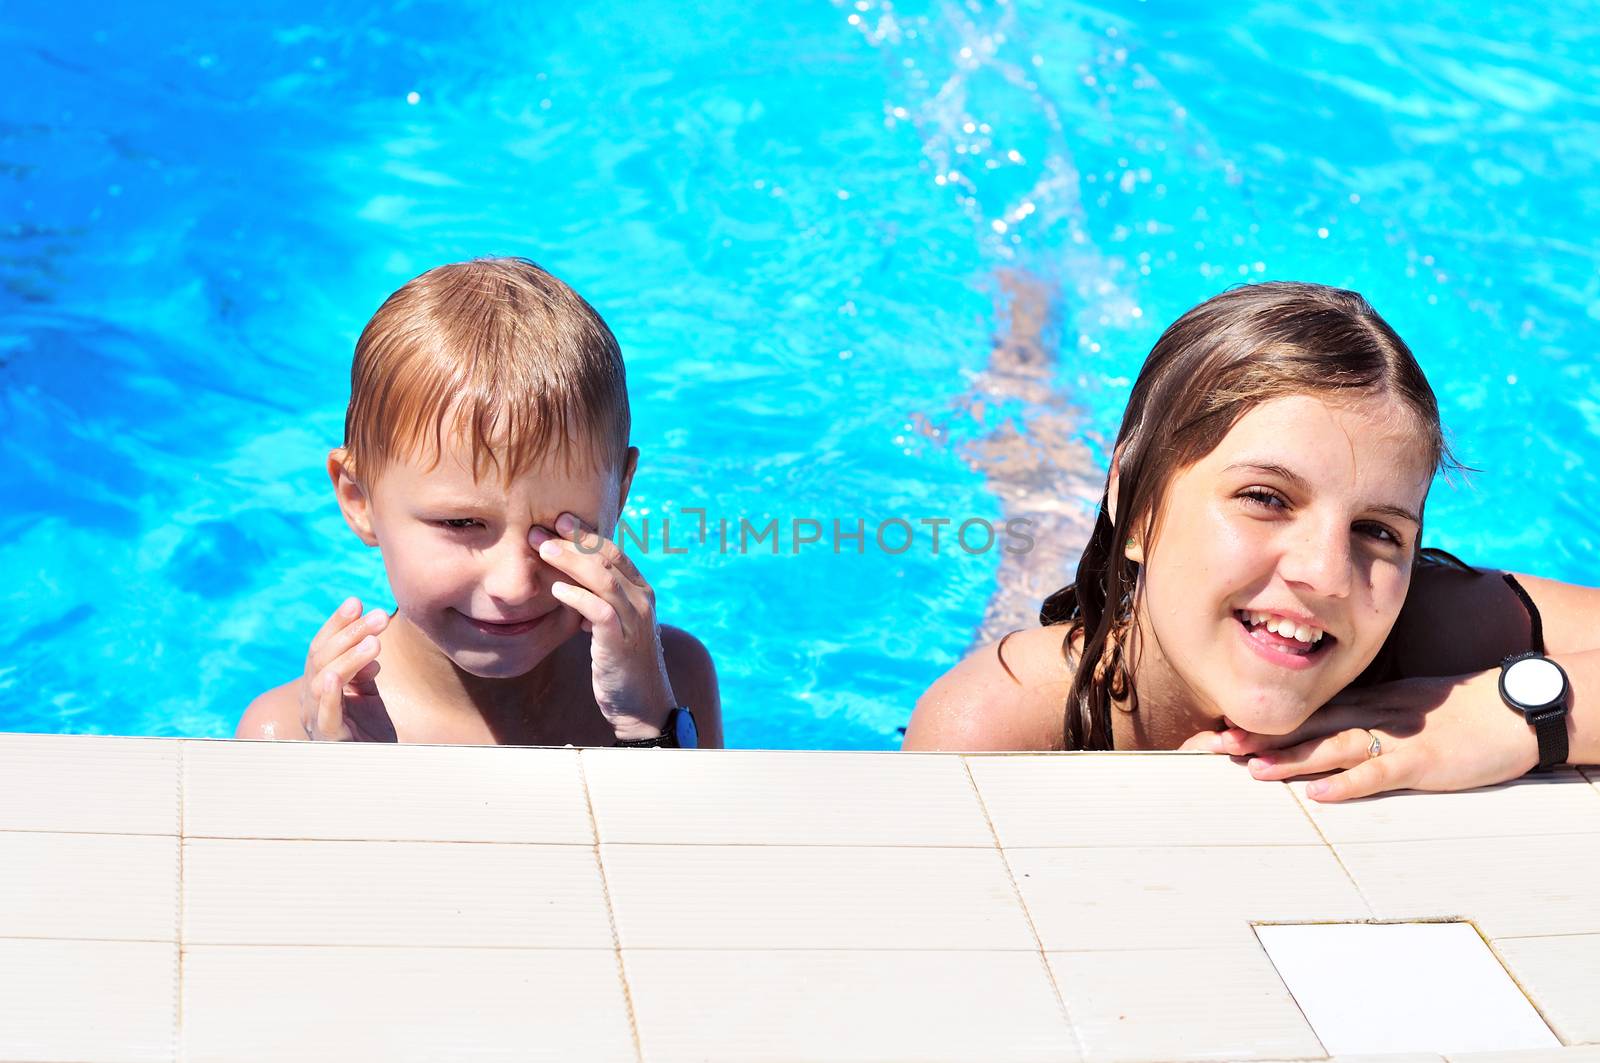 brothe and sister in the pool by Reana